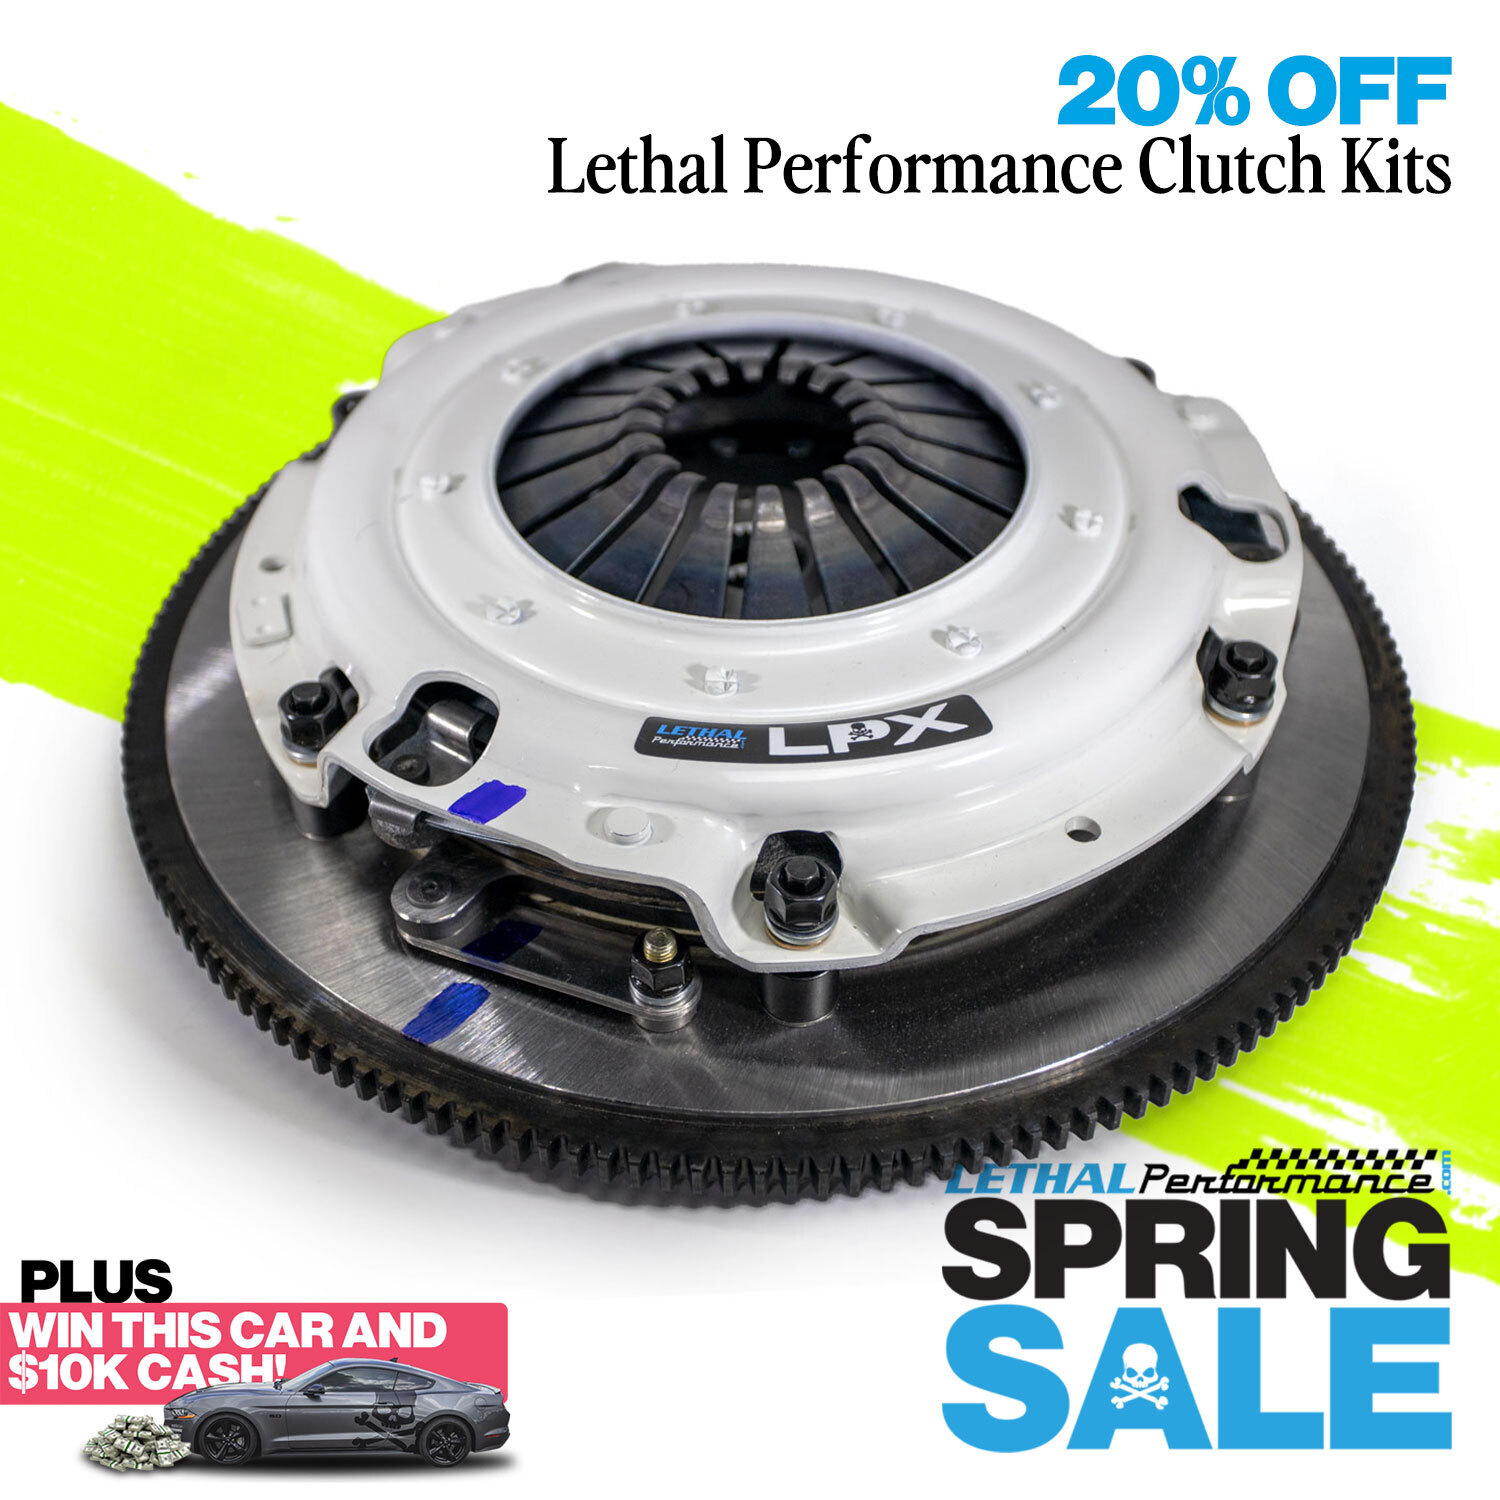 S650 Mustang Spring SALE has SPRUNG here at Lethal Performance!! springsale_LPclutches (1)